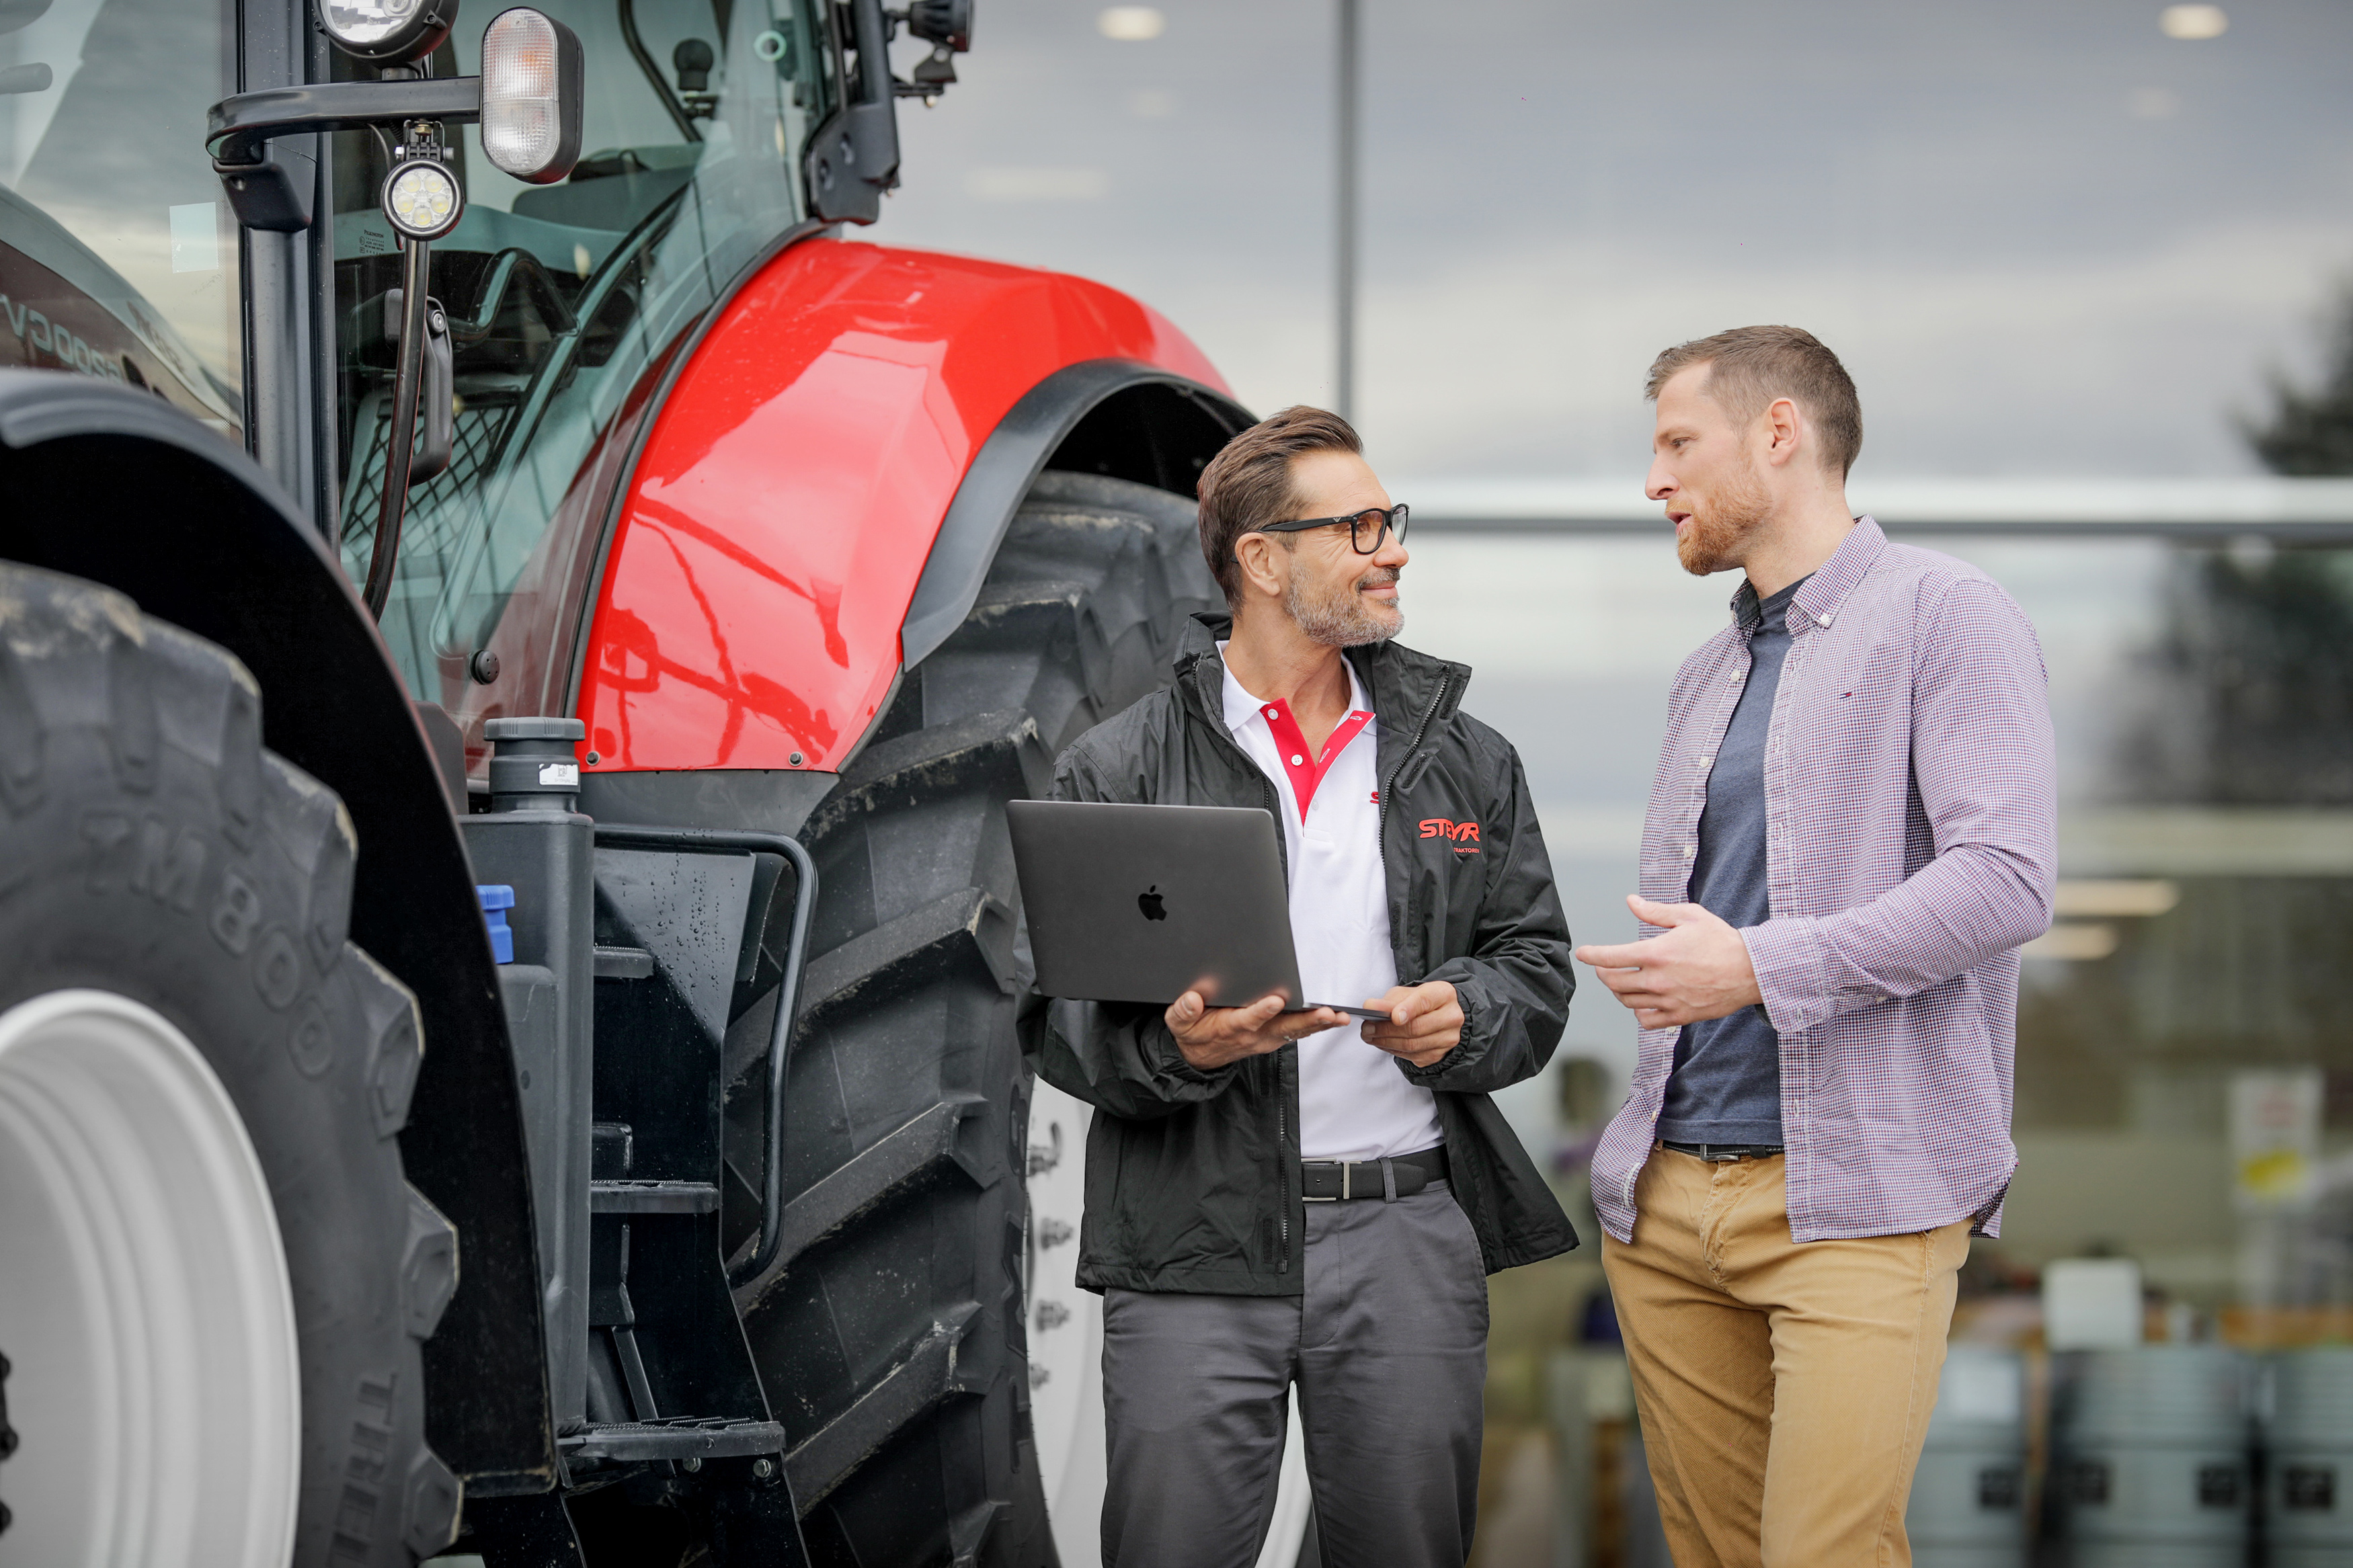 S-Tech Protect supports owners of Terrus CVT tractors